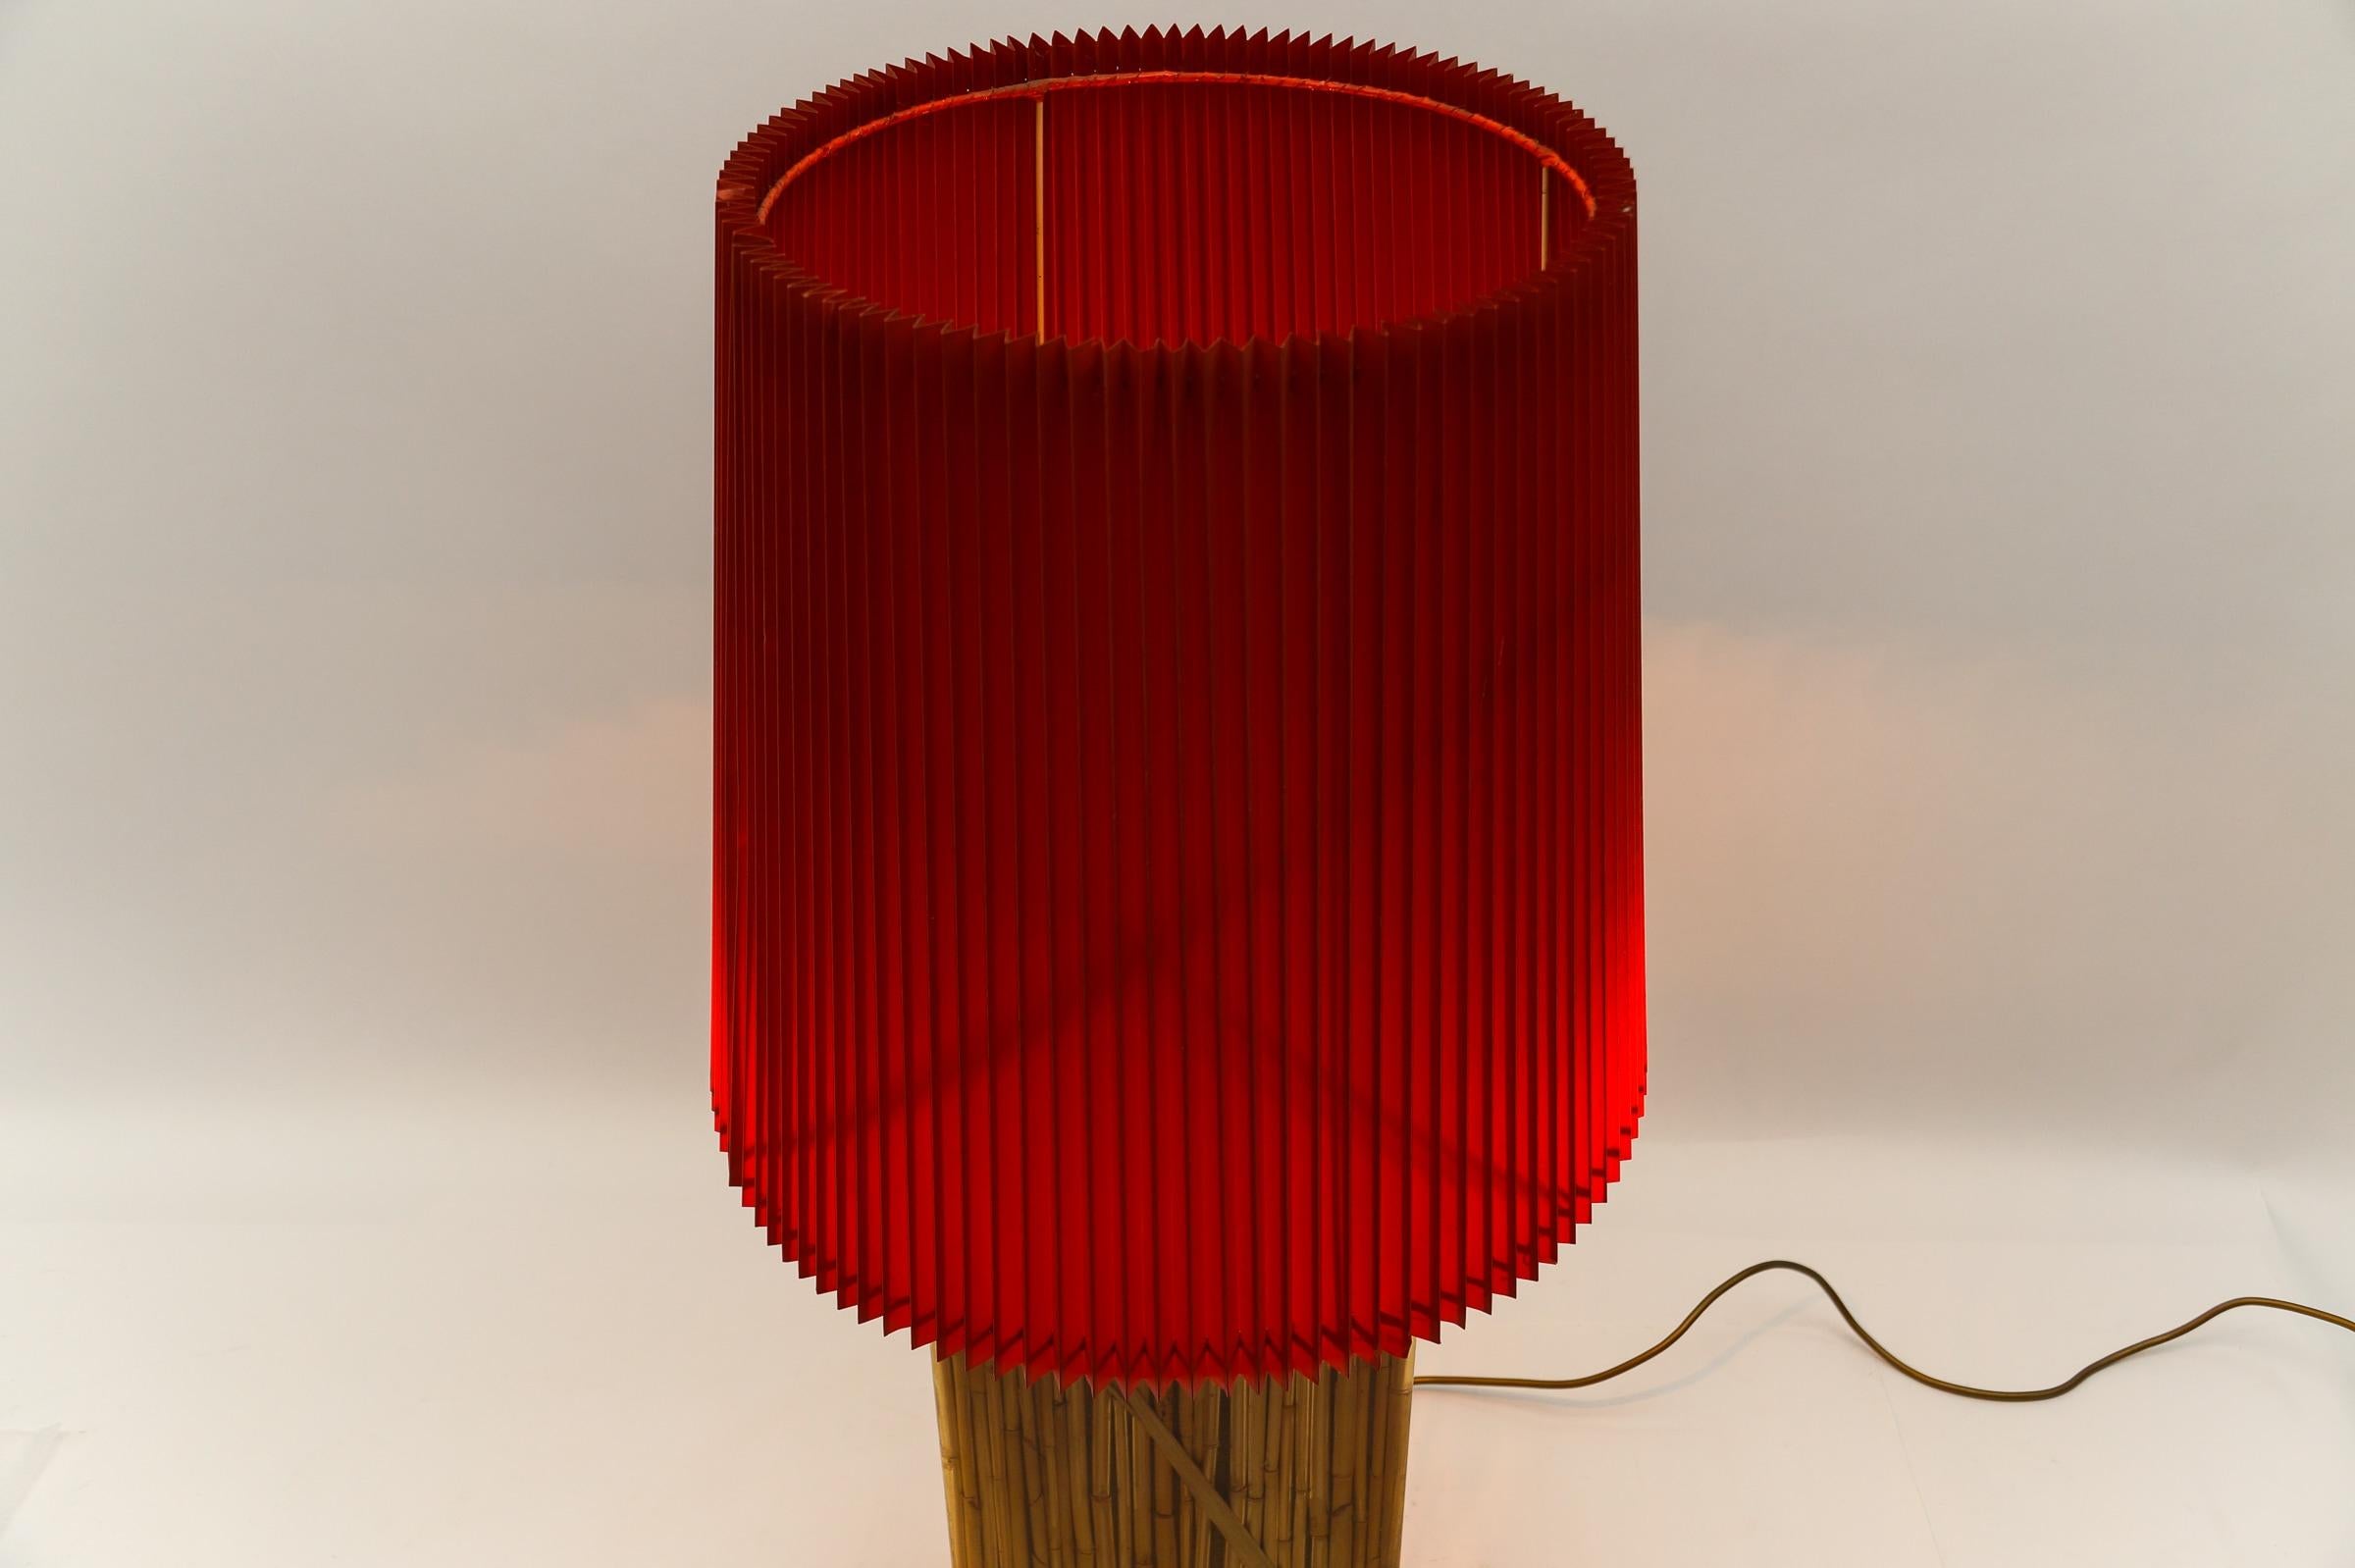 Large Riccardo Marzi Bamboo Resin Table Lamp, 1970s Italy For Sale 1